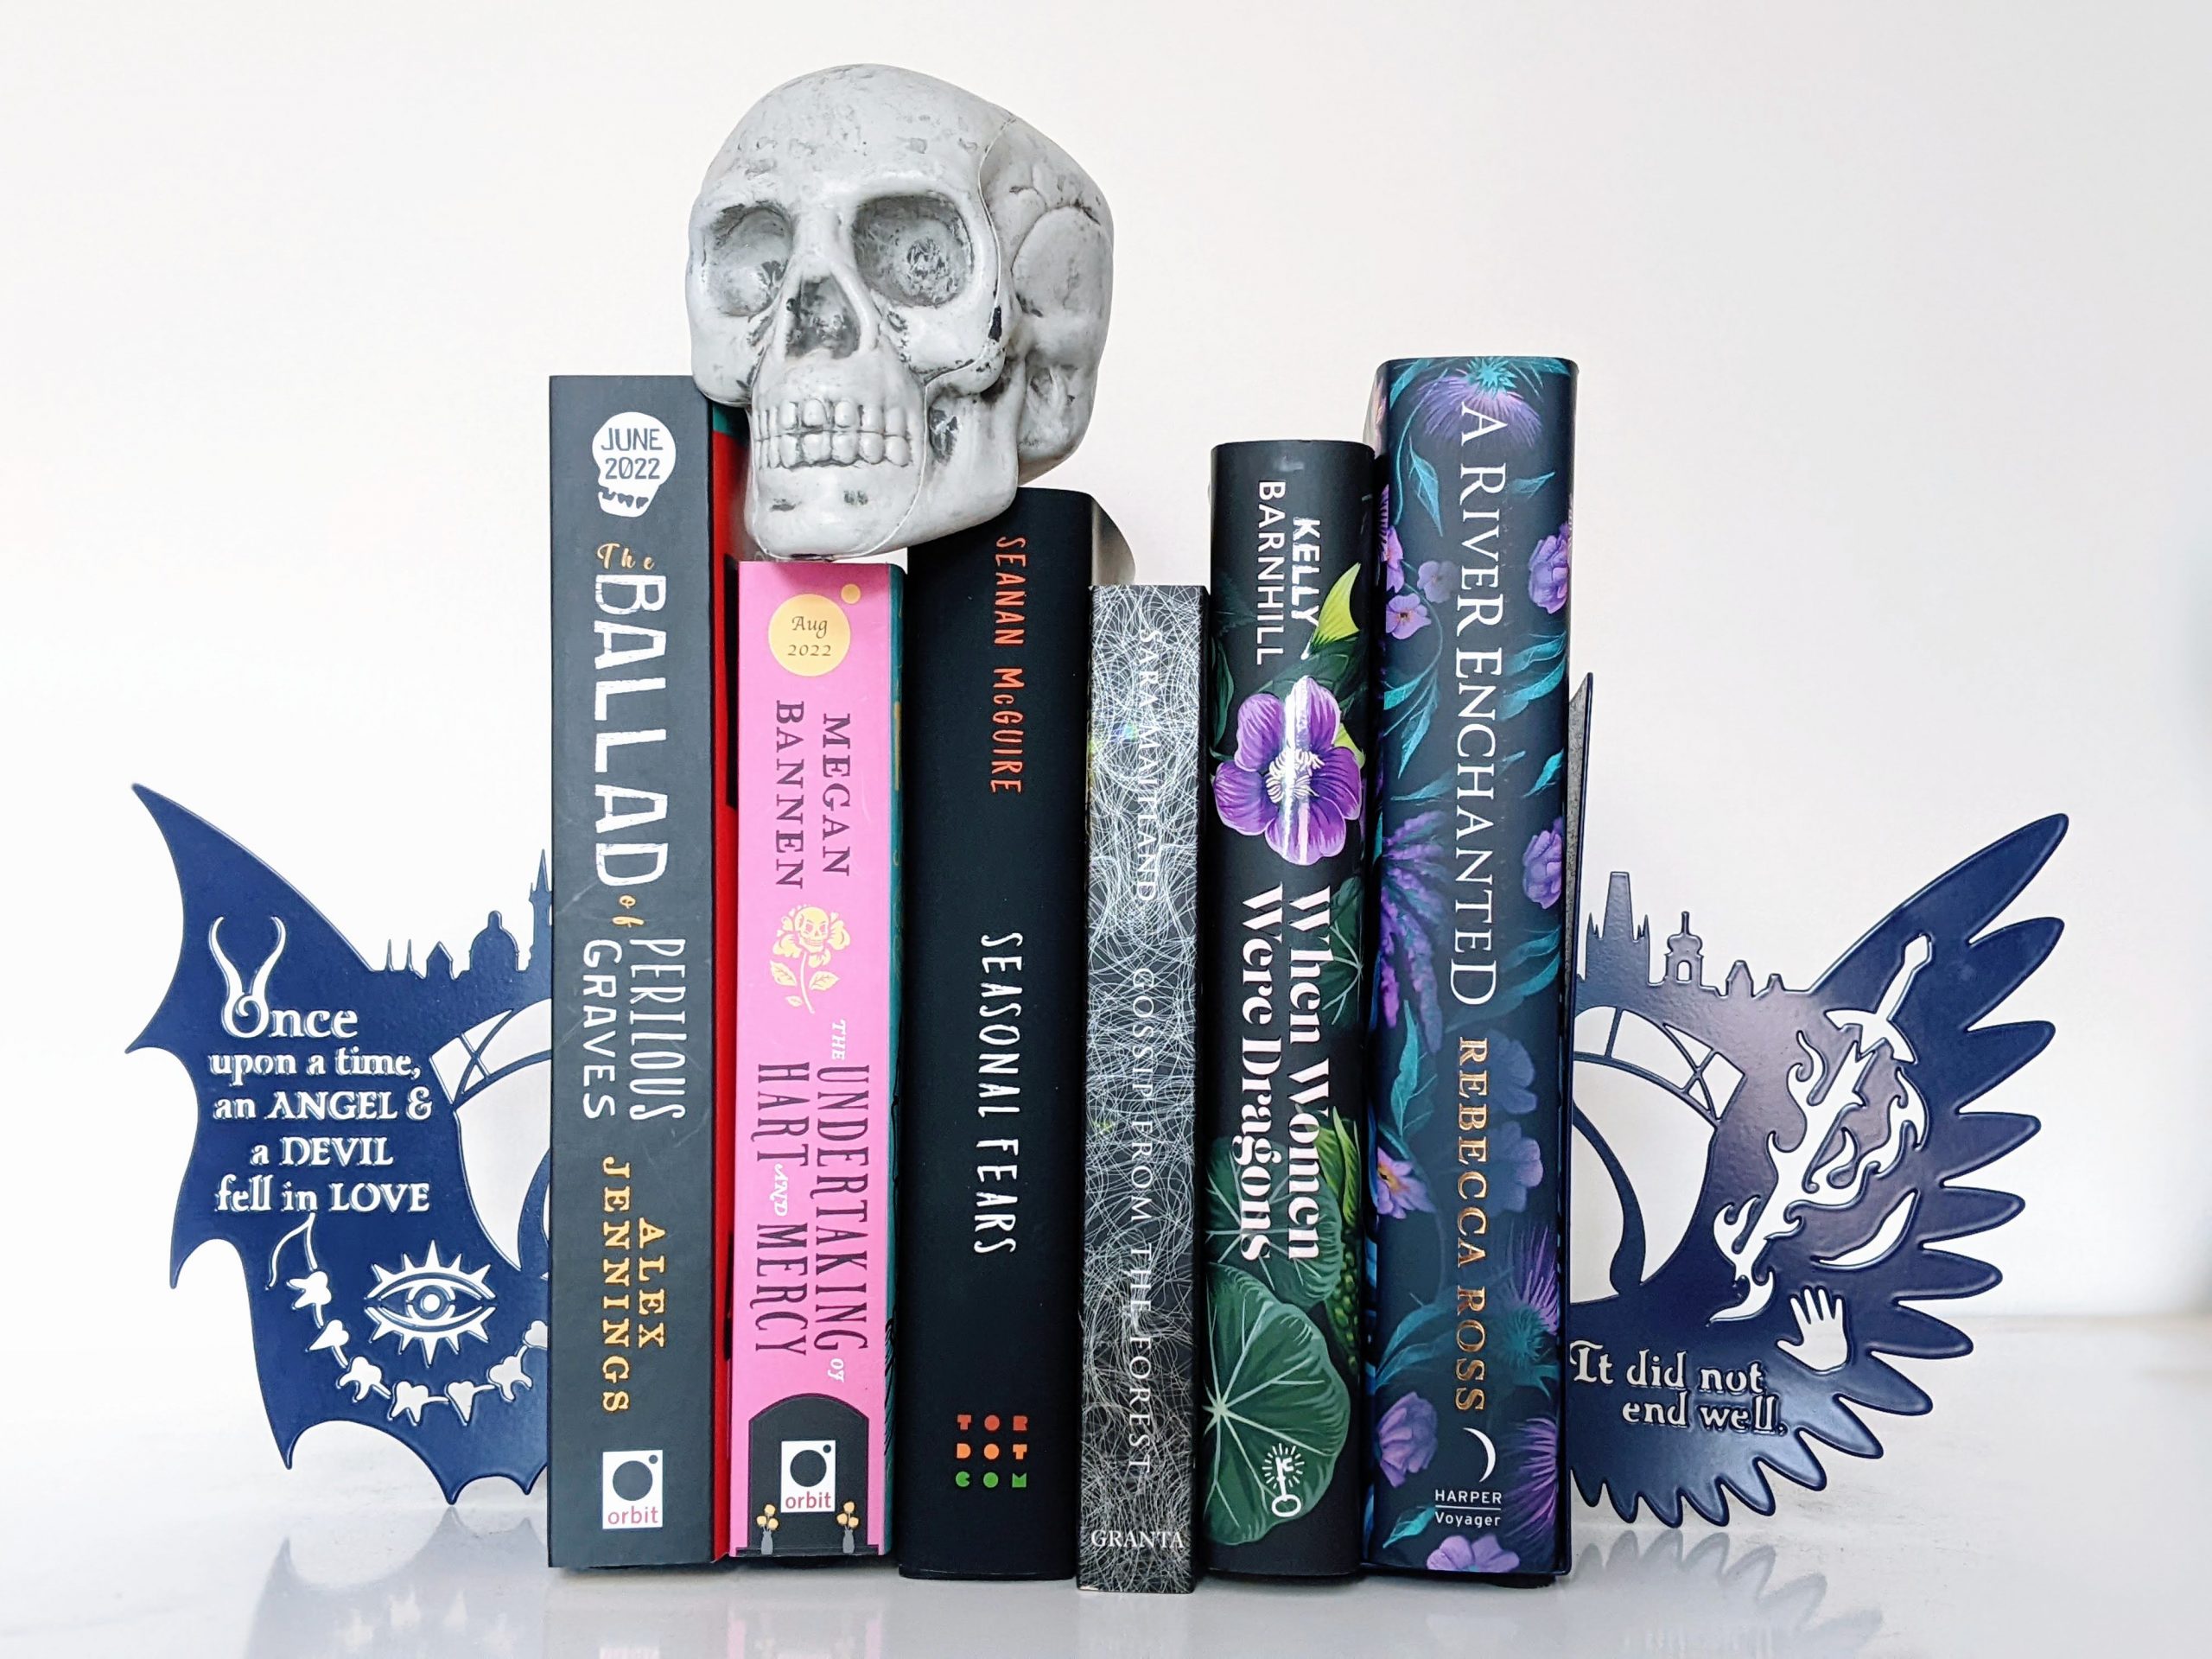 Six books (titles listed in post) in angel wing book ends with fake skull on top.